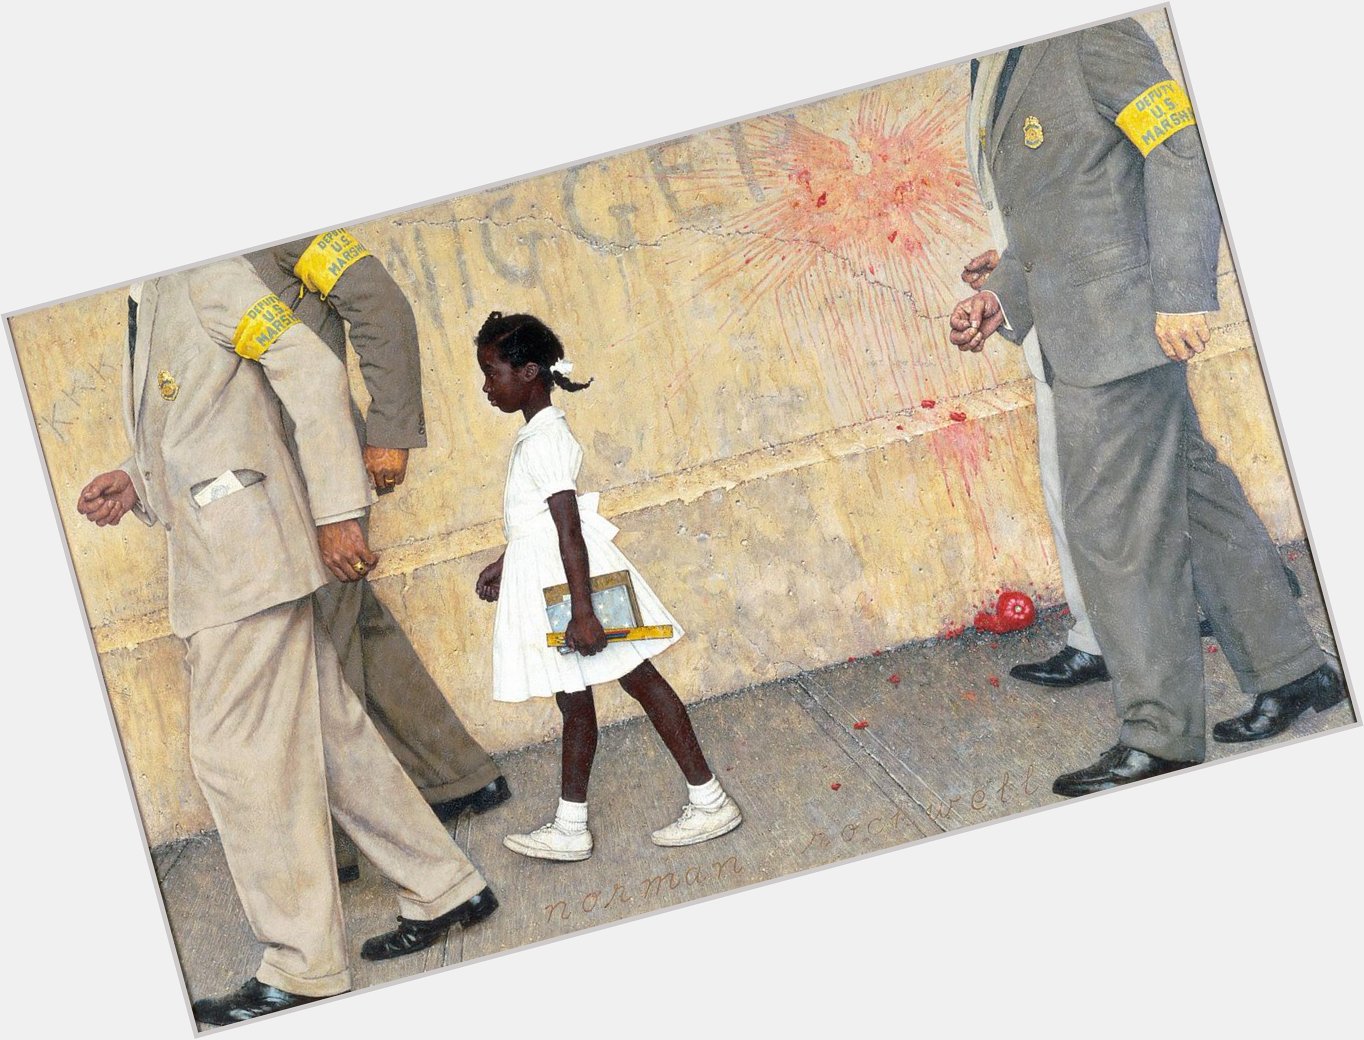 Happy 61st birthday to the amazingly brave Ruby Bridges. She is the epitome of 